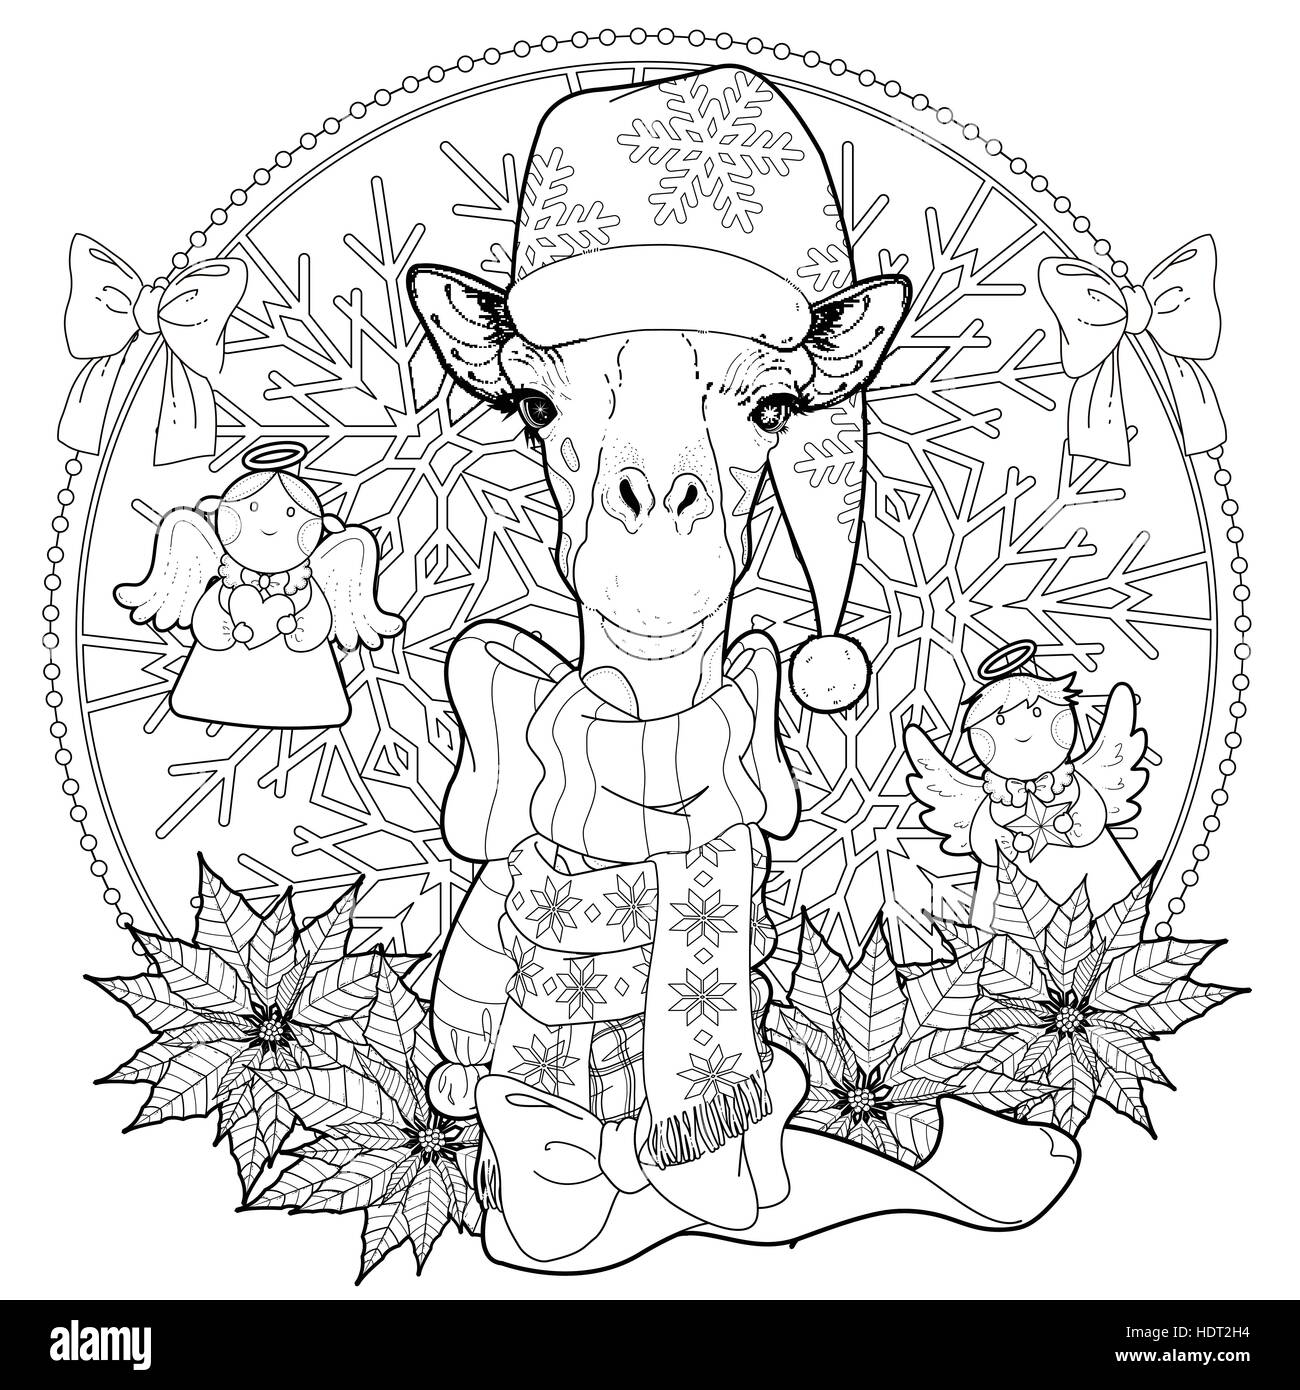 Christmas giraffe coloring page with decorations in exquisite line